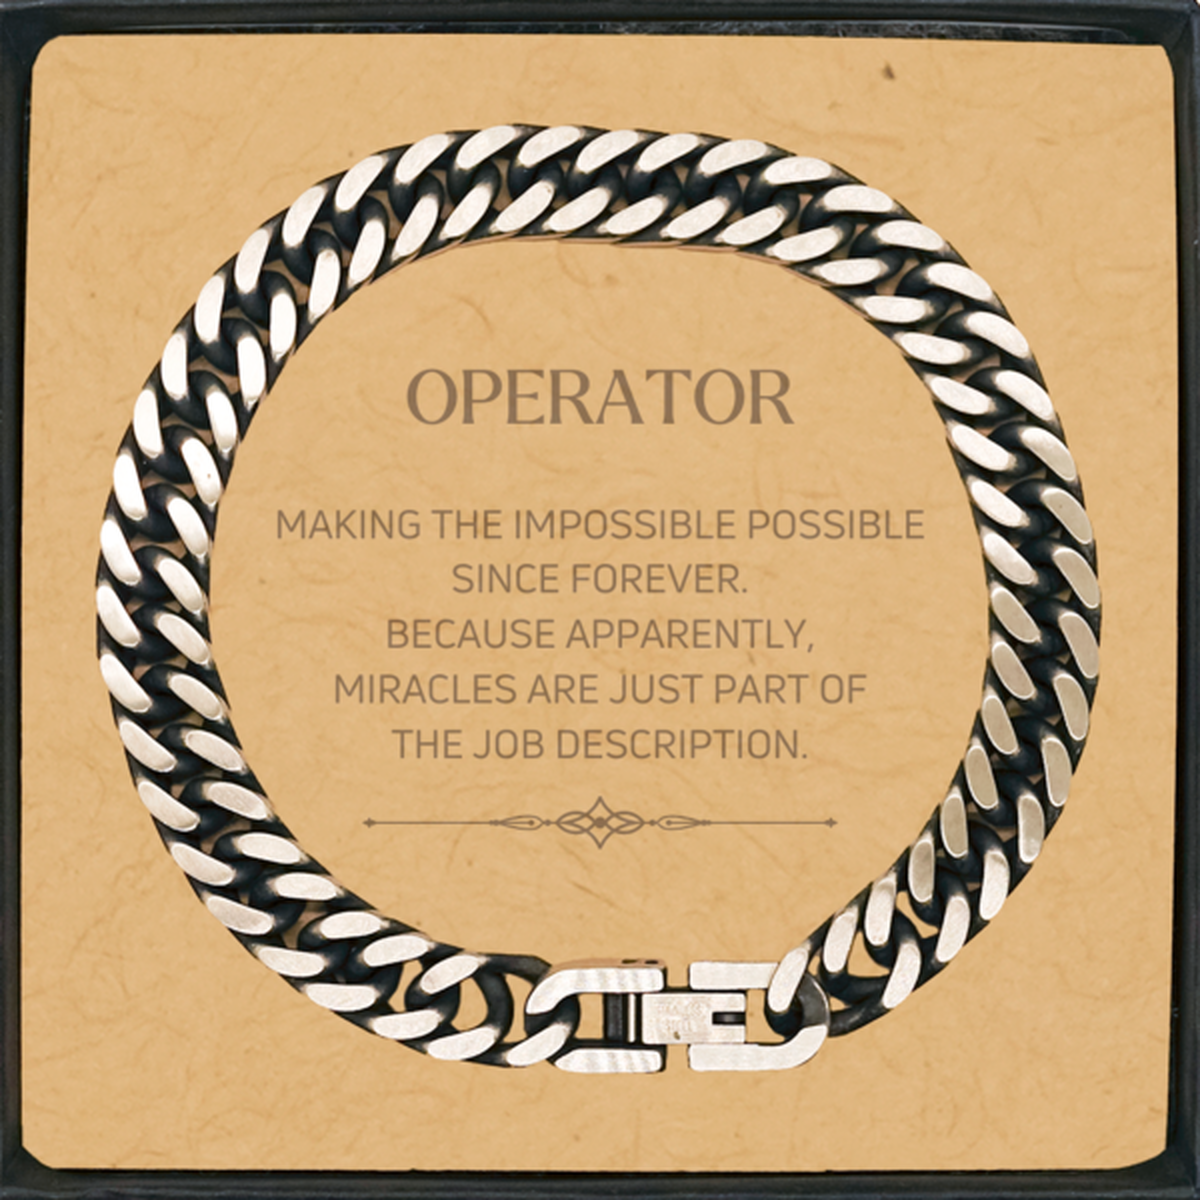 Funny Operator Gifts, Miracles are just part of the job description, Inspirational Birthday Cuban Link Chain Bracelet For Operator, Men, Women, Coworkers, Friends, Boss